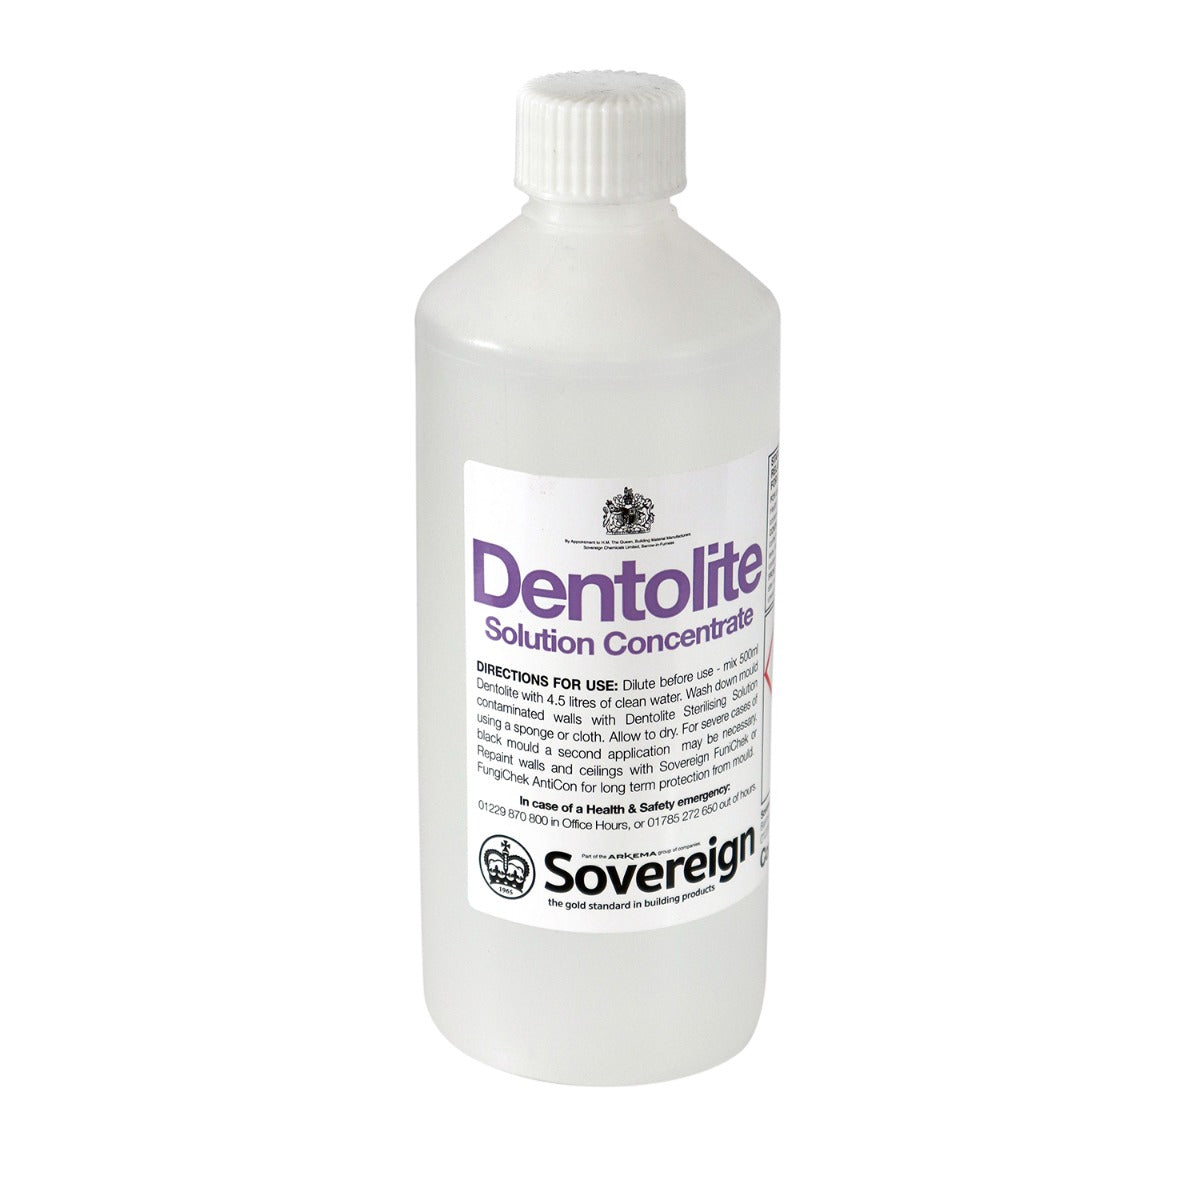 Sovereign Dentolite Anti-Fungal Concentrate - 500ml (30806437)